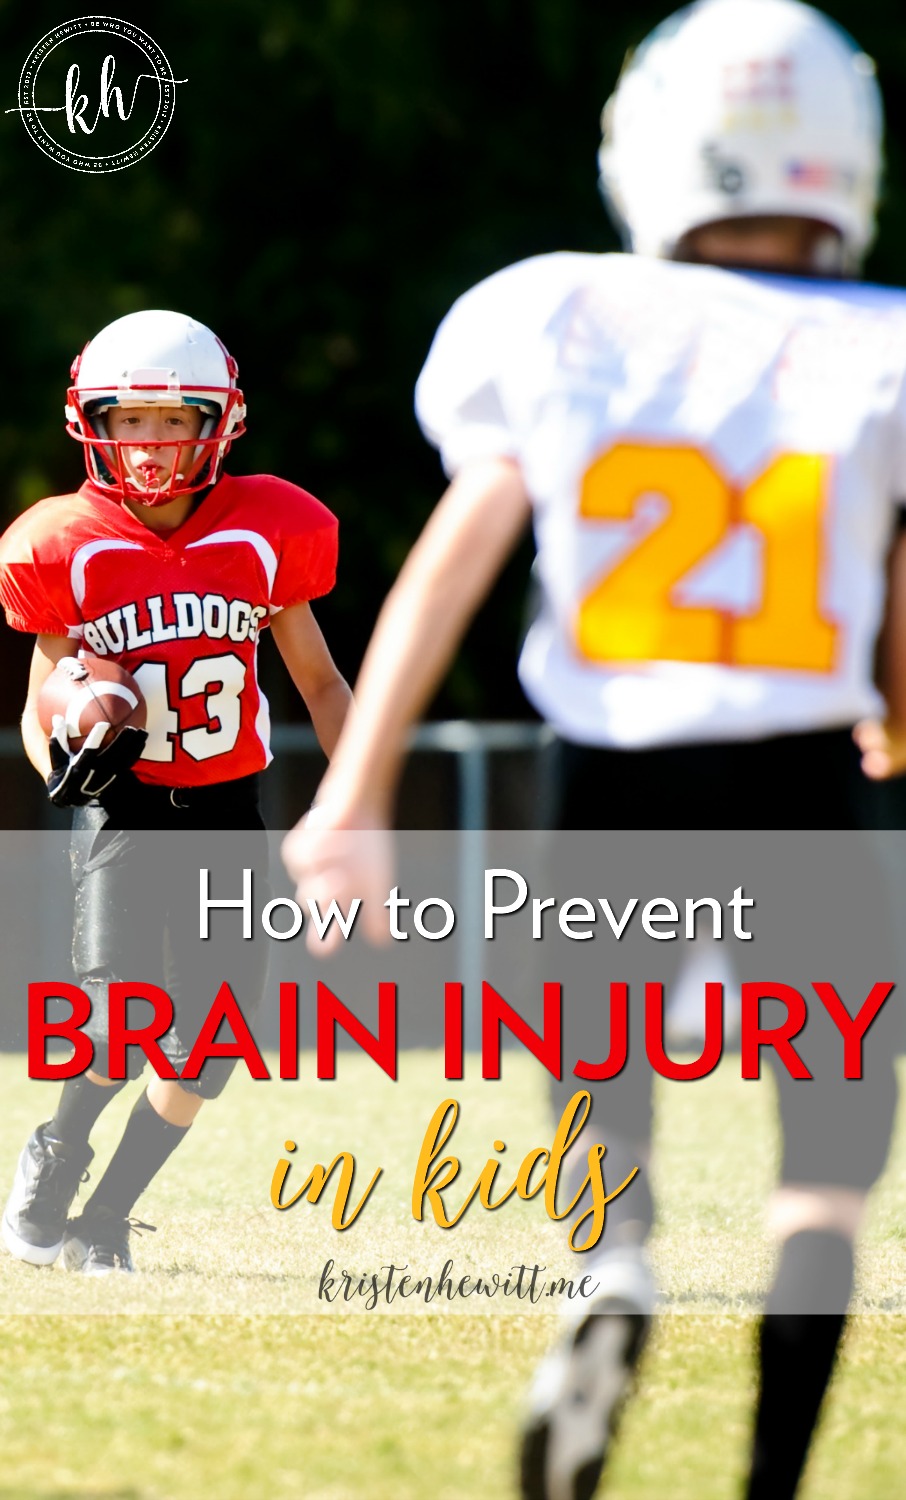 How to prevent brain injury in children. These tips will help your family learn about the importance of traumatic brain injuries and how to prevent them.